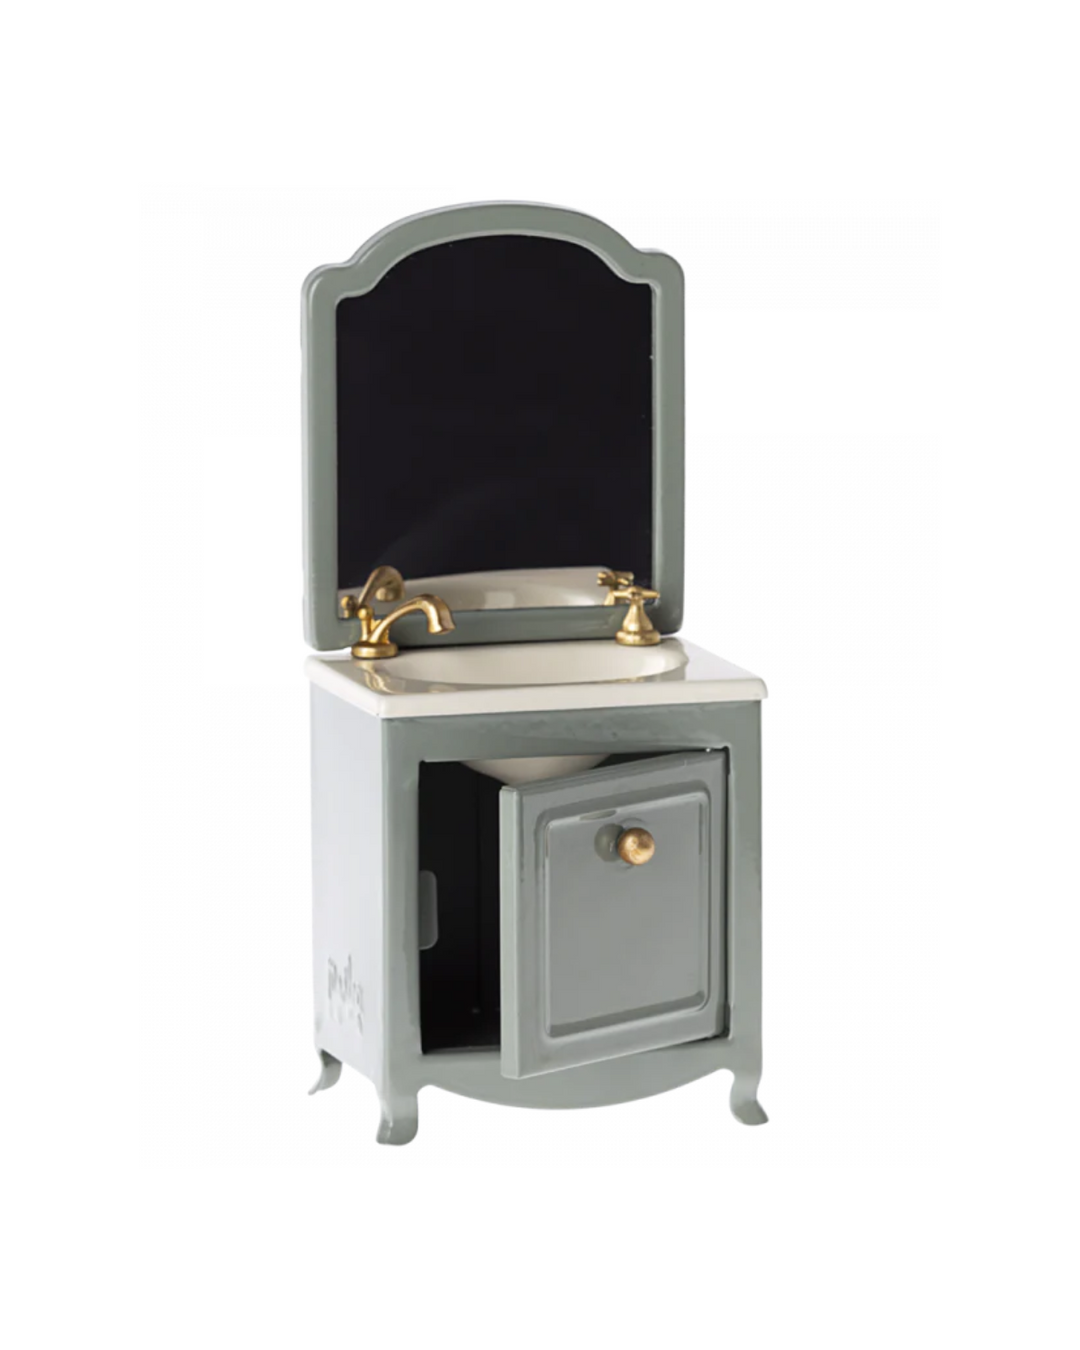 Mouse Sink with Mirror in Dark Mint: Dollhouse Furniture